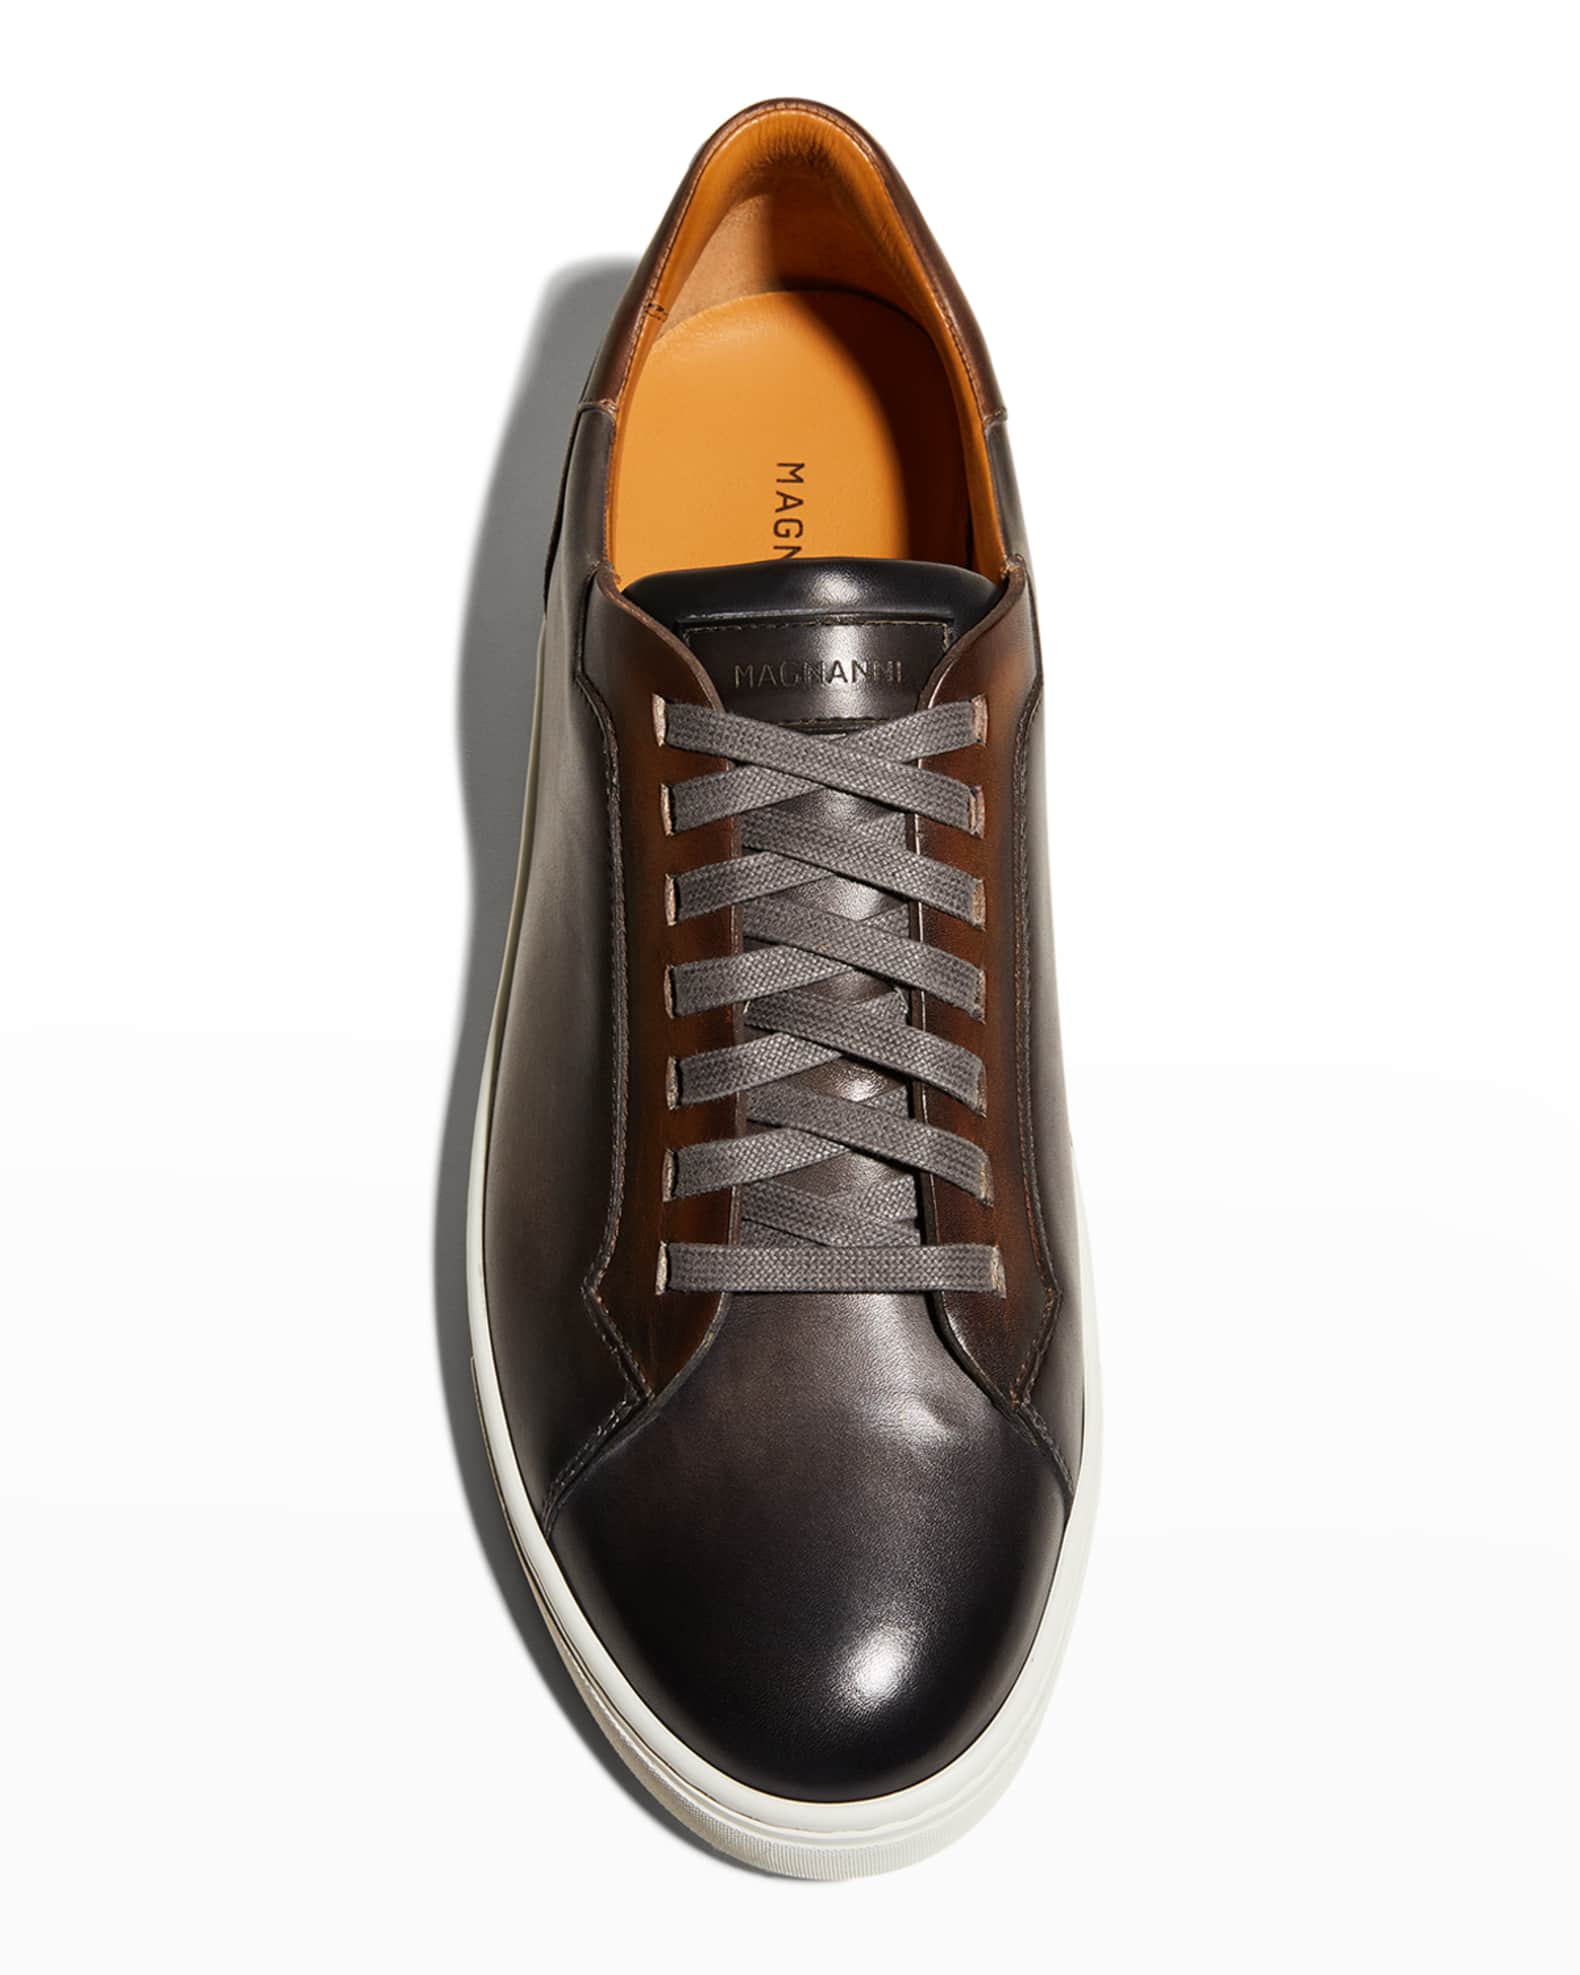 Magnanni Men's Amadeo Cupsole Leather Fashion Sneakers | Neiman Marcus